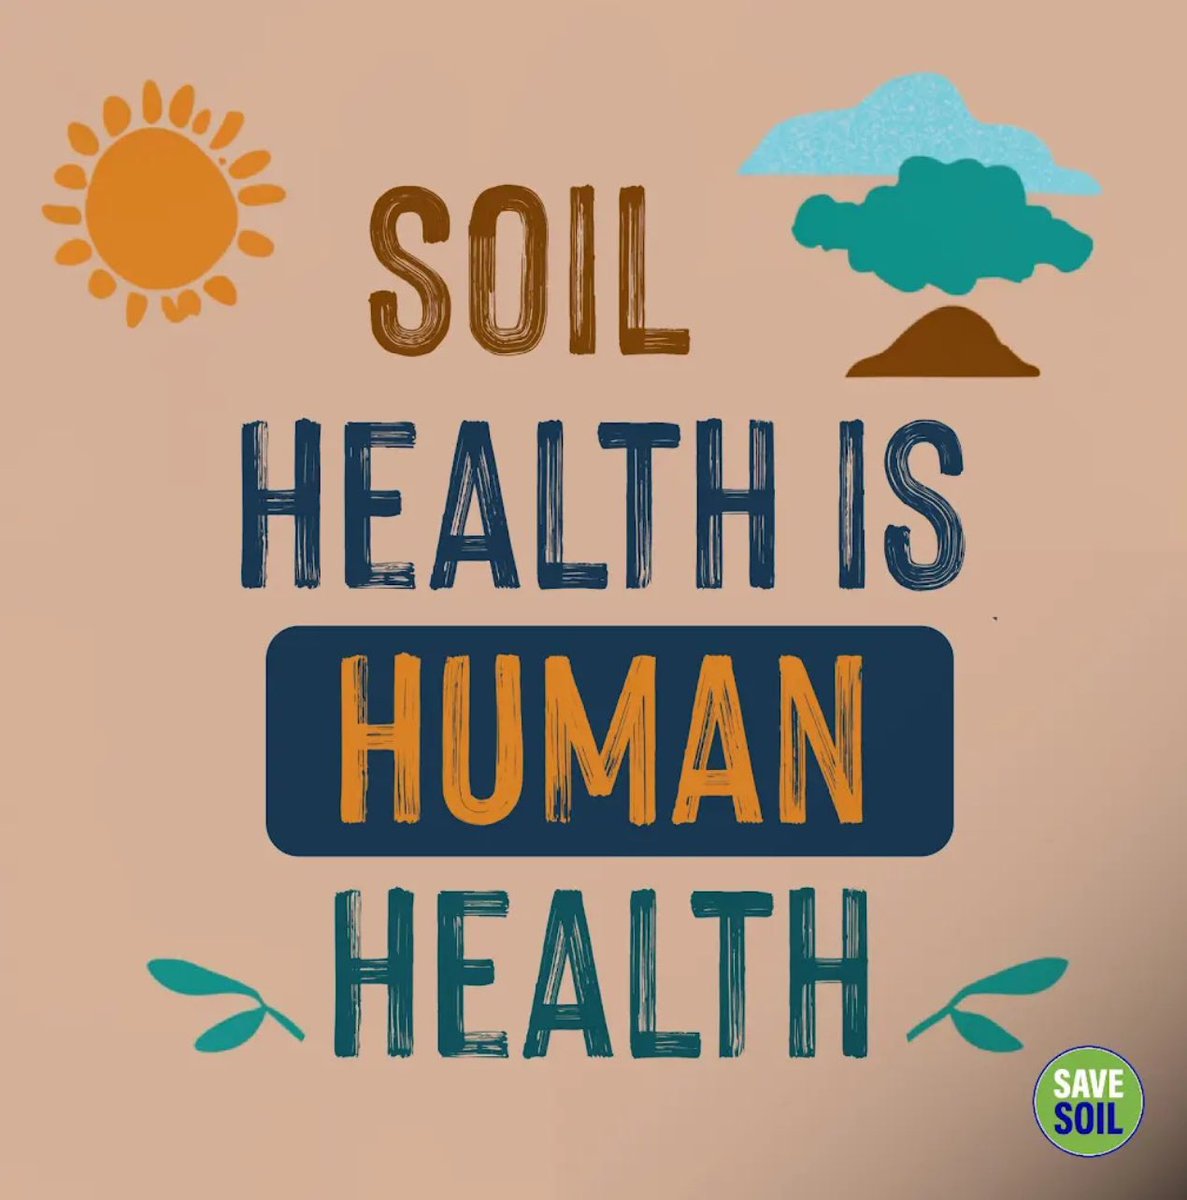 @SadhguruJV Great to see EU parliament for championing the #SoilMonitoringLaw . Every one of us must become Conscious of this: restoring Soil health is not an act of generosity- it is an act of survival. We owe it to generation next. @Europarl_EN
@EU_Commission
@EUCouncil @cpsavesoil